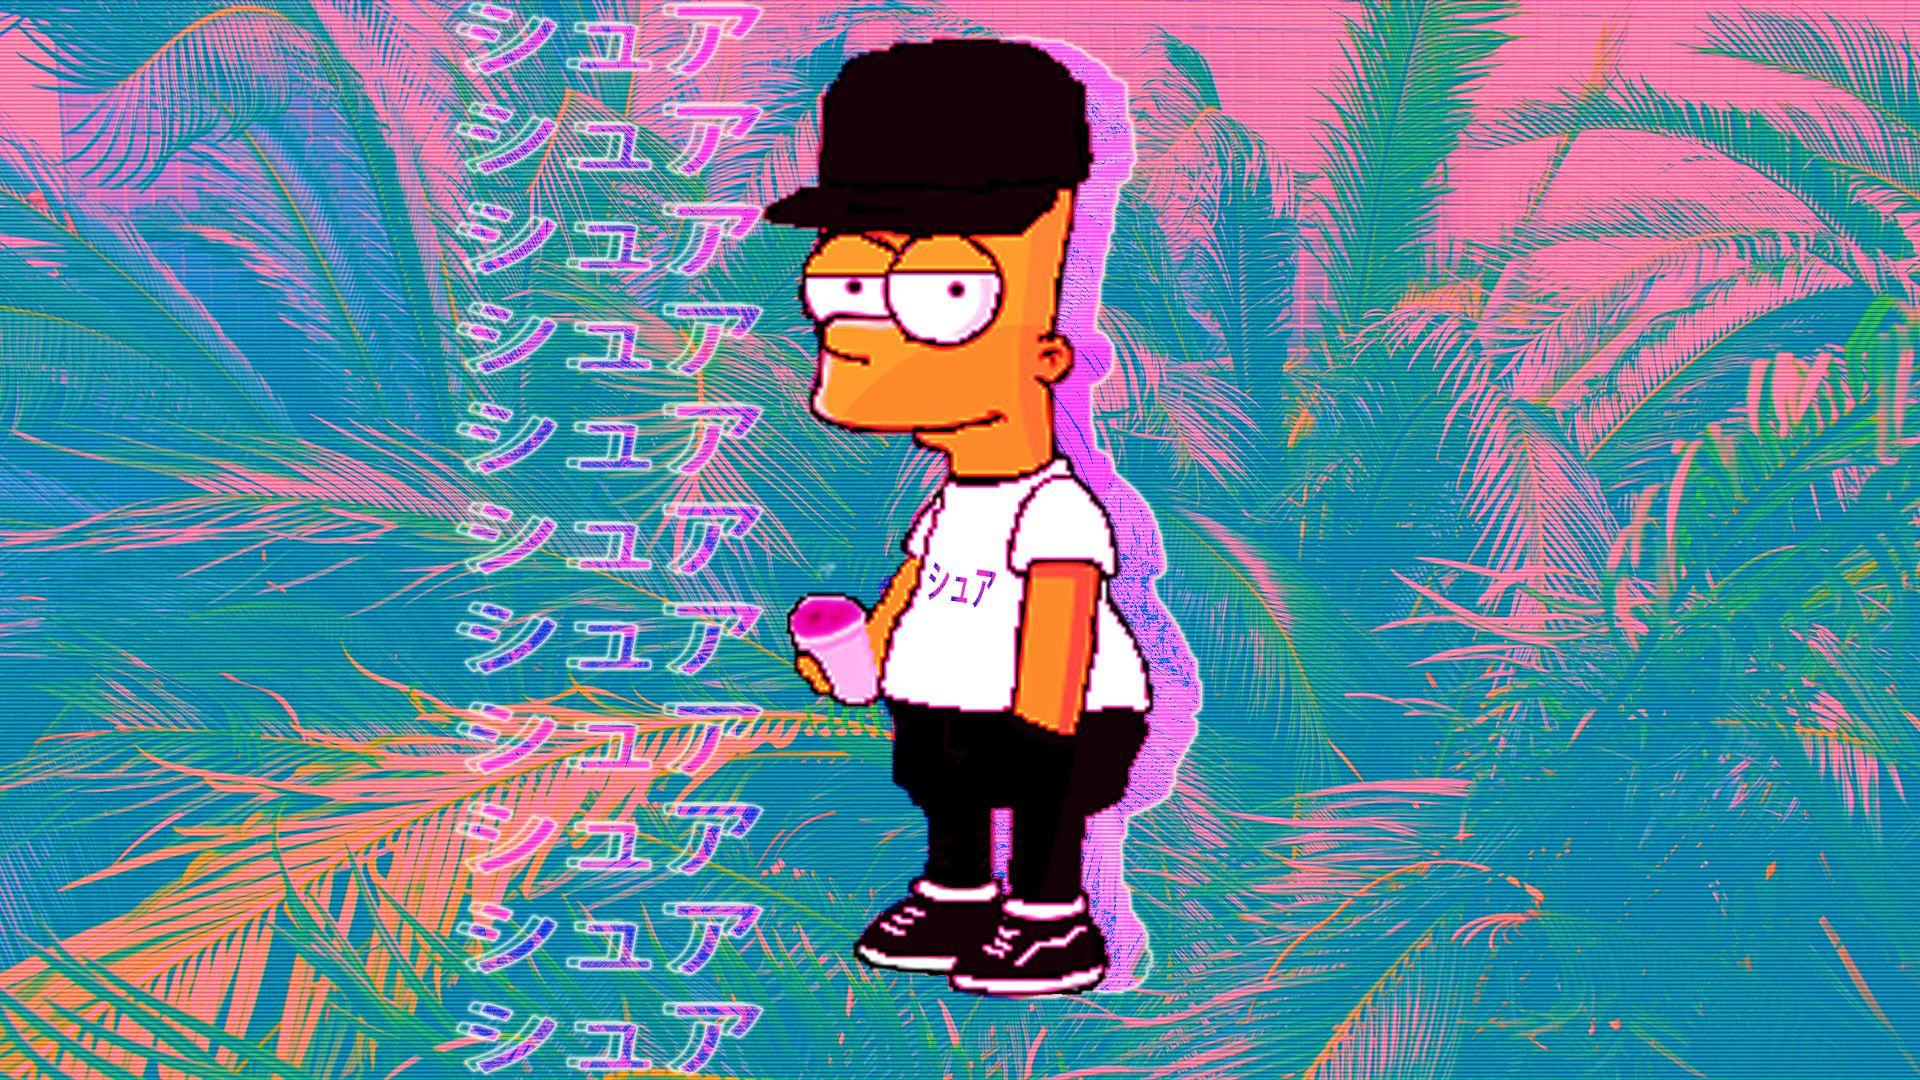 Bart Simpson Supreme Iphone Wallpaper Hd New Wallpapers